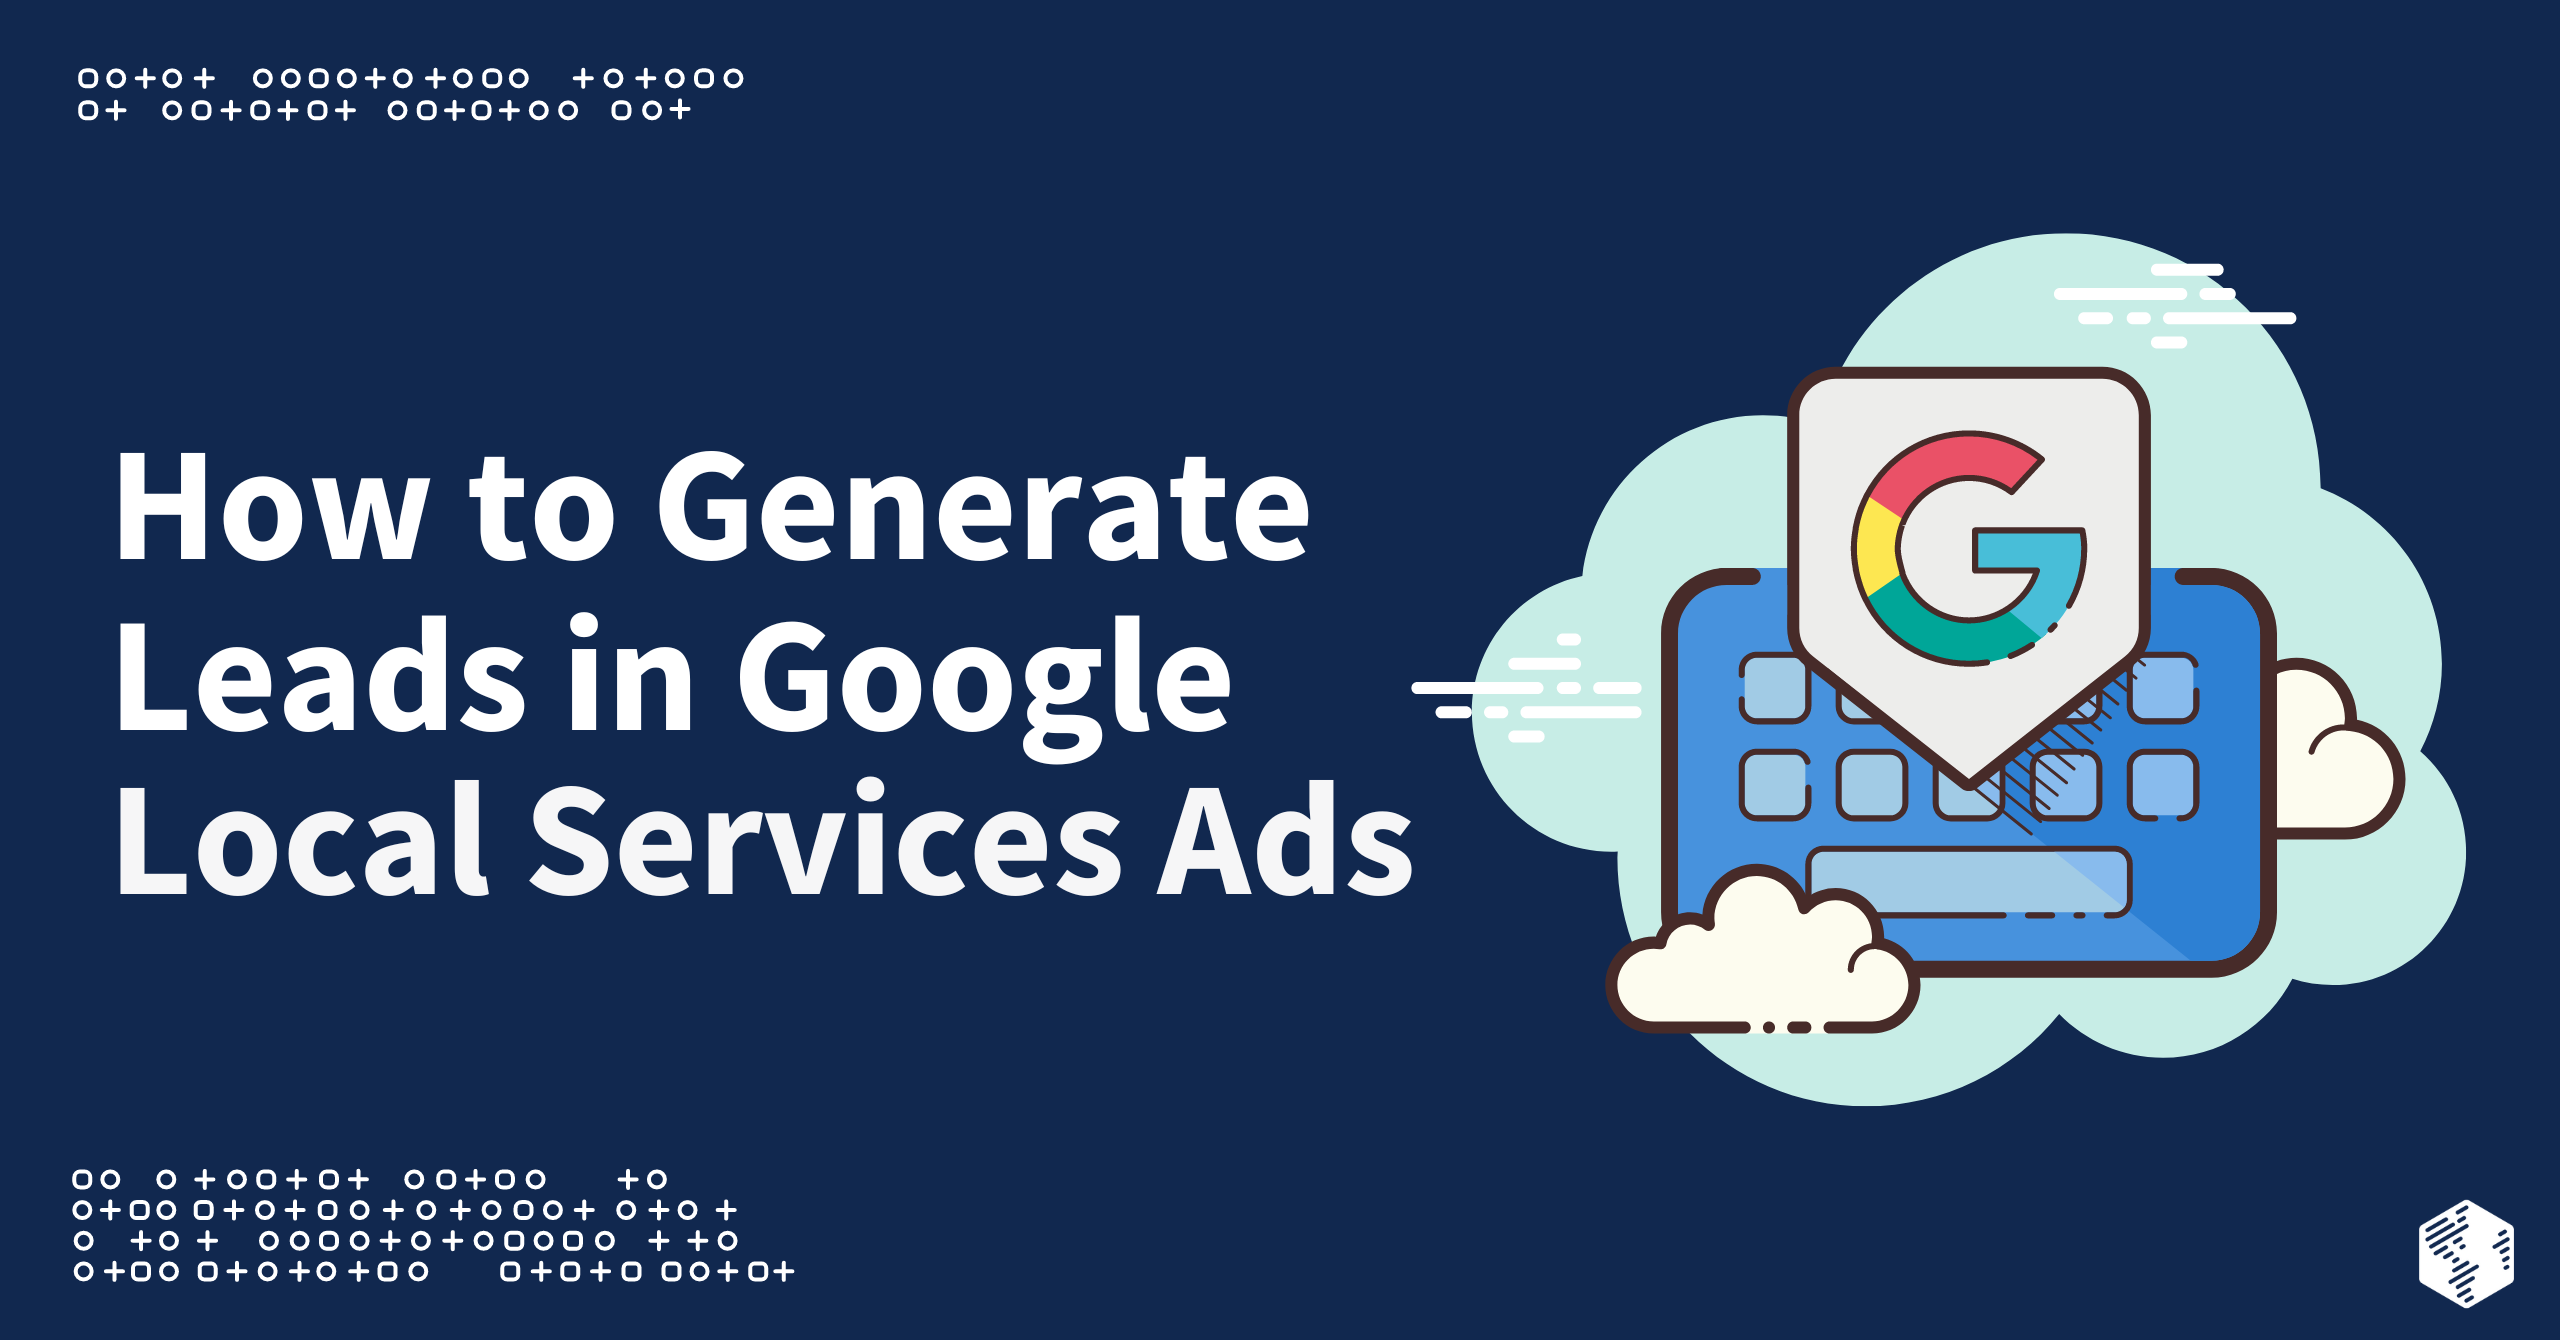 How to Generate Leads in Google Local Services Ads